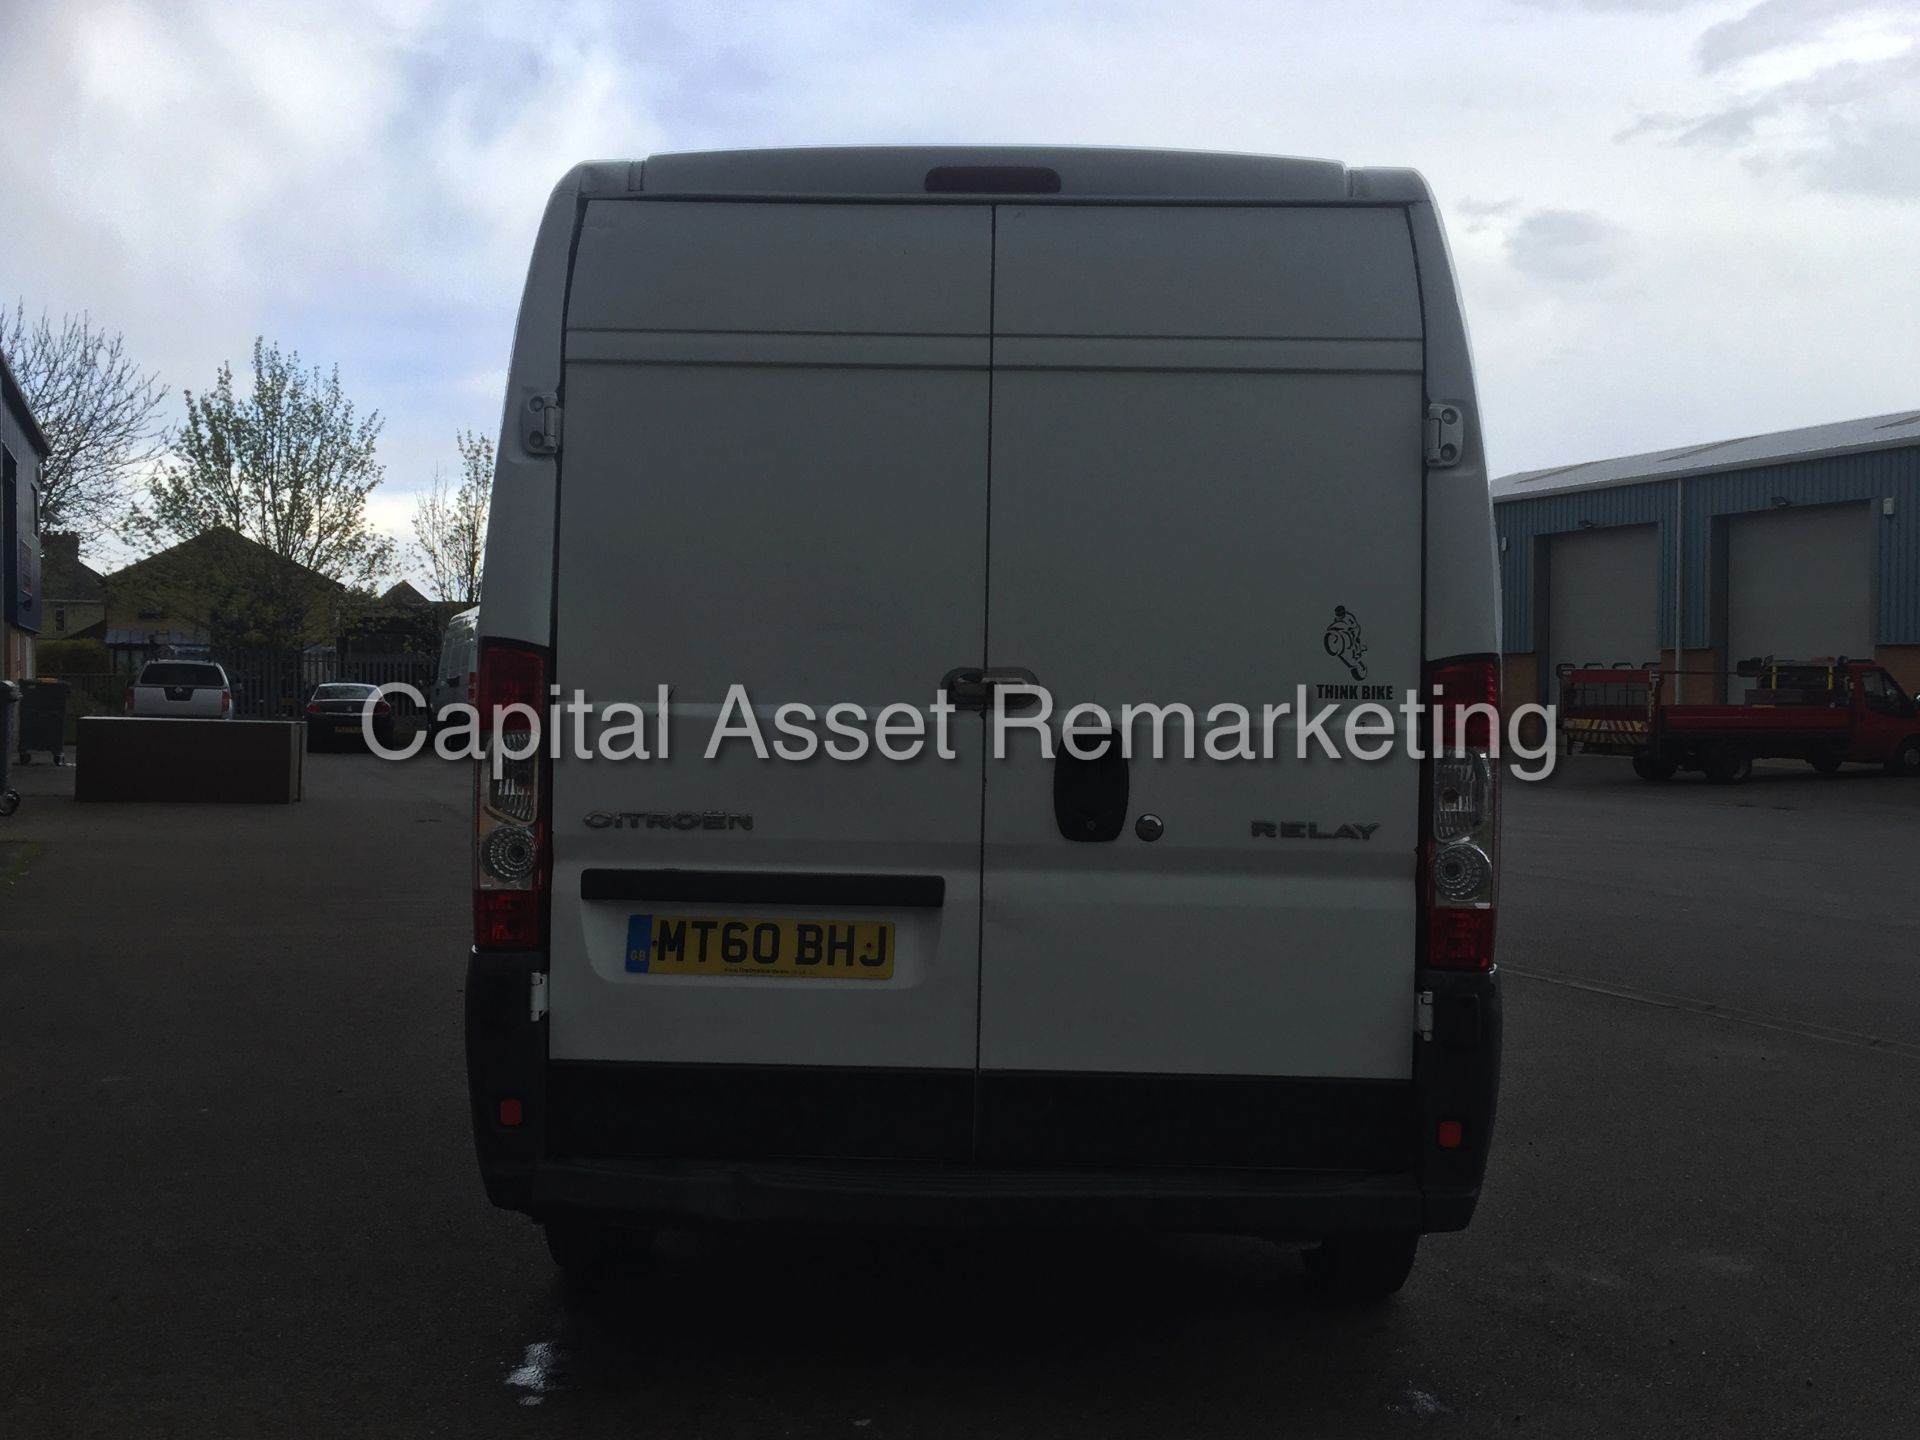 CITROEN RELAY 35 LWB HI-ROOF (2011 MODEL) 2.2 HDI - 120 PS - 6 SPEED (ELECTRIC PACK) - Image 7 of 19